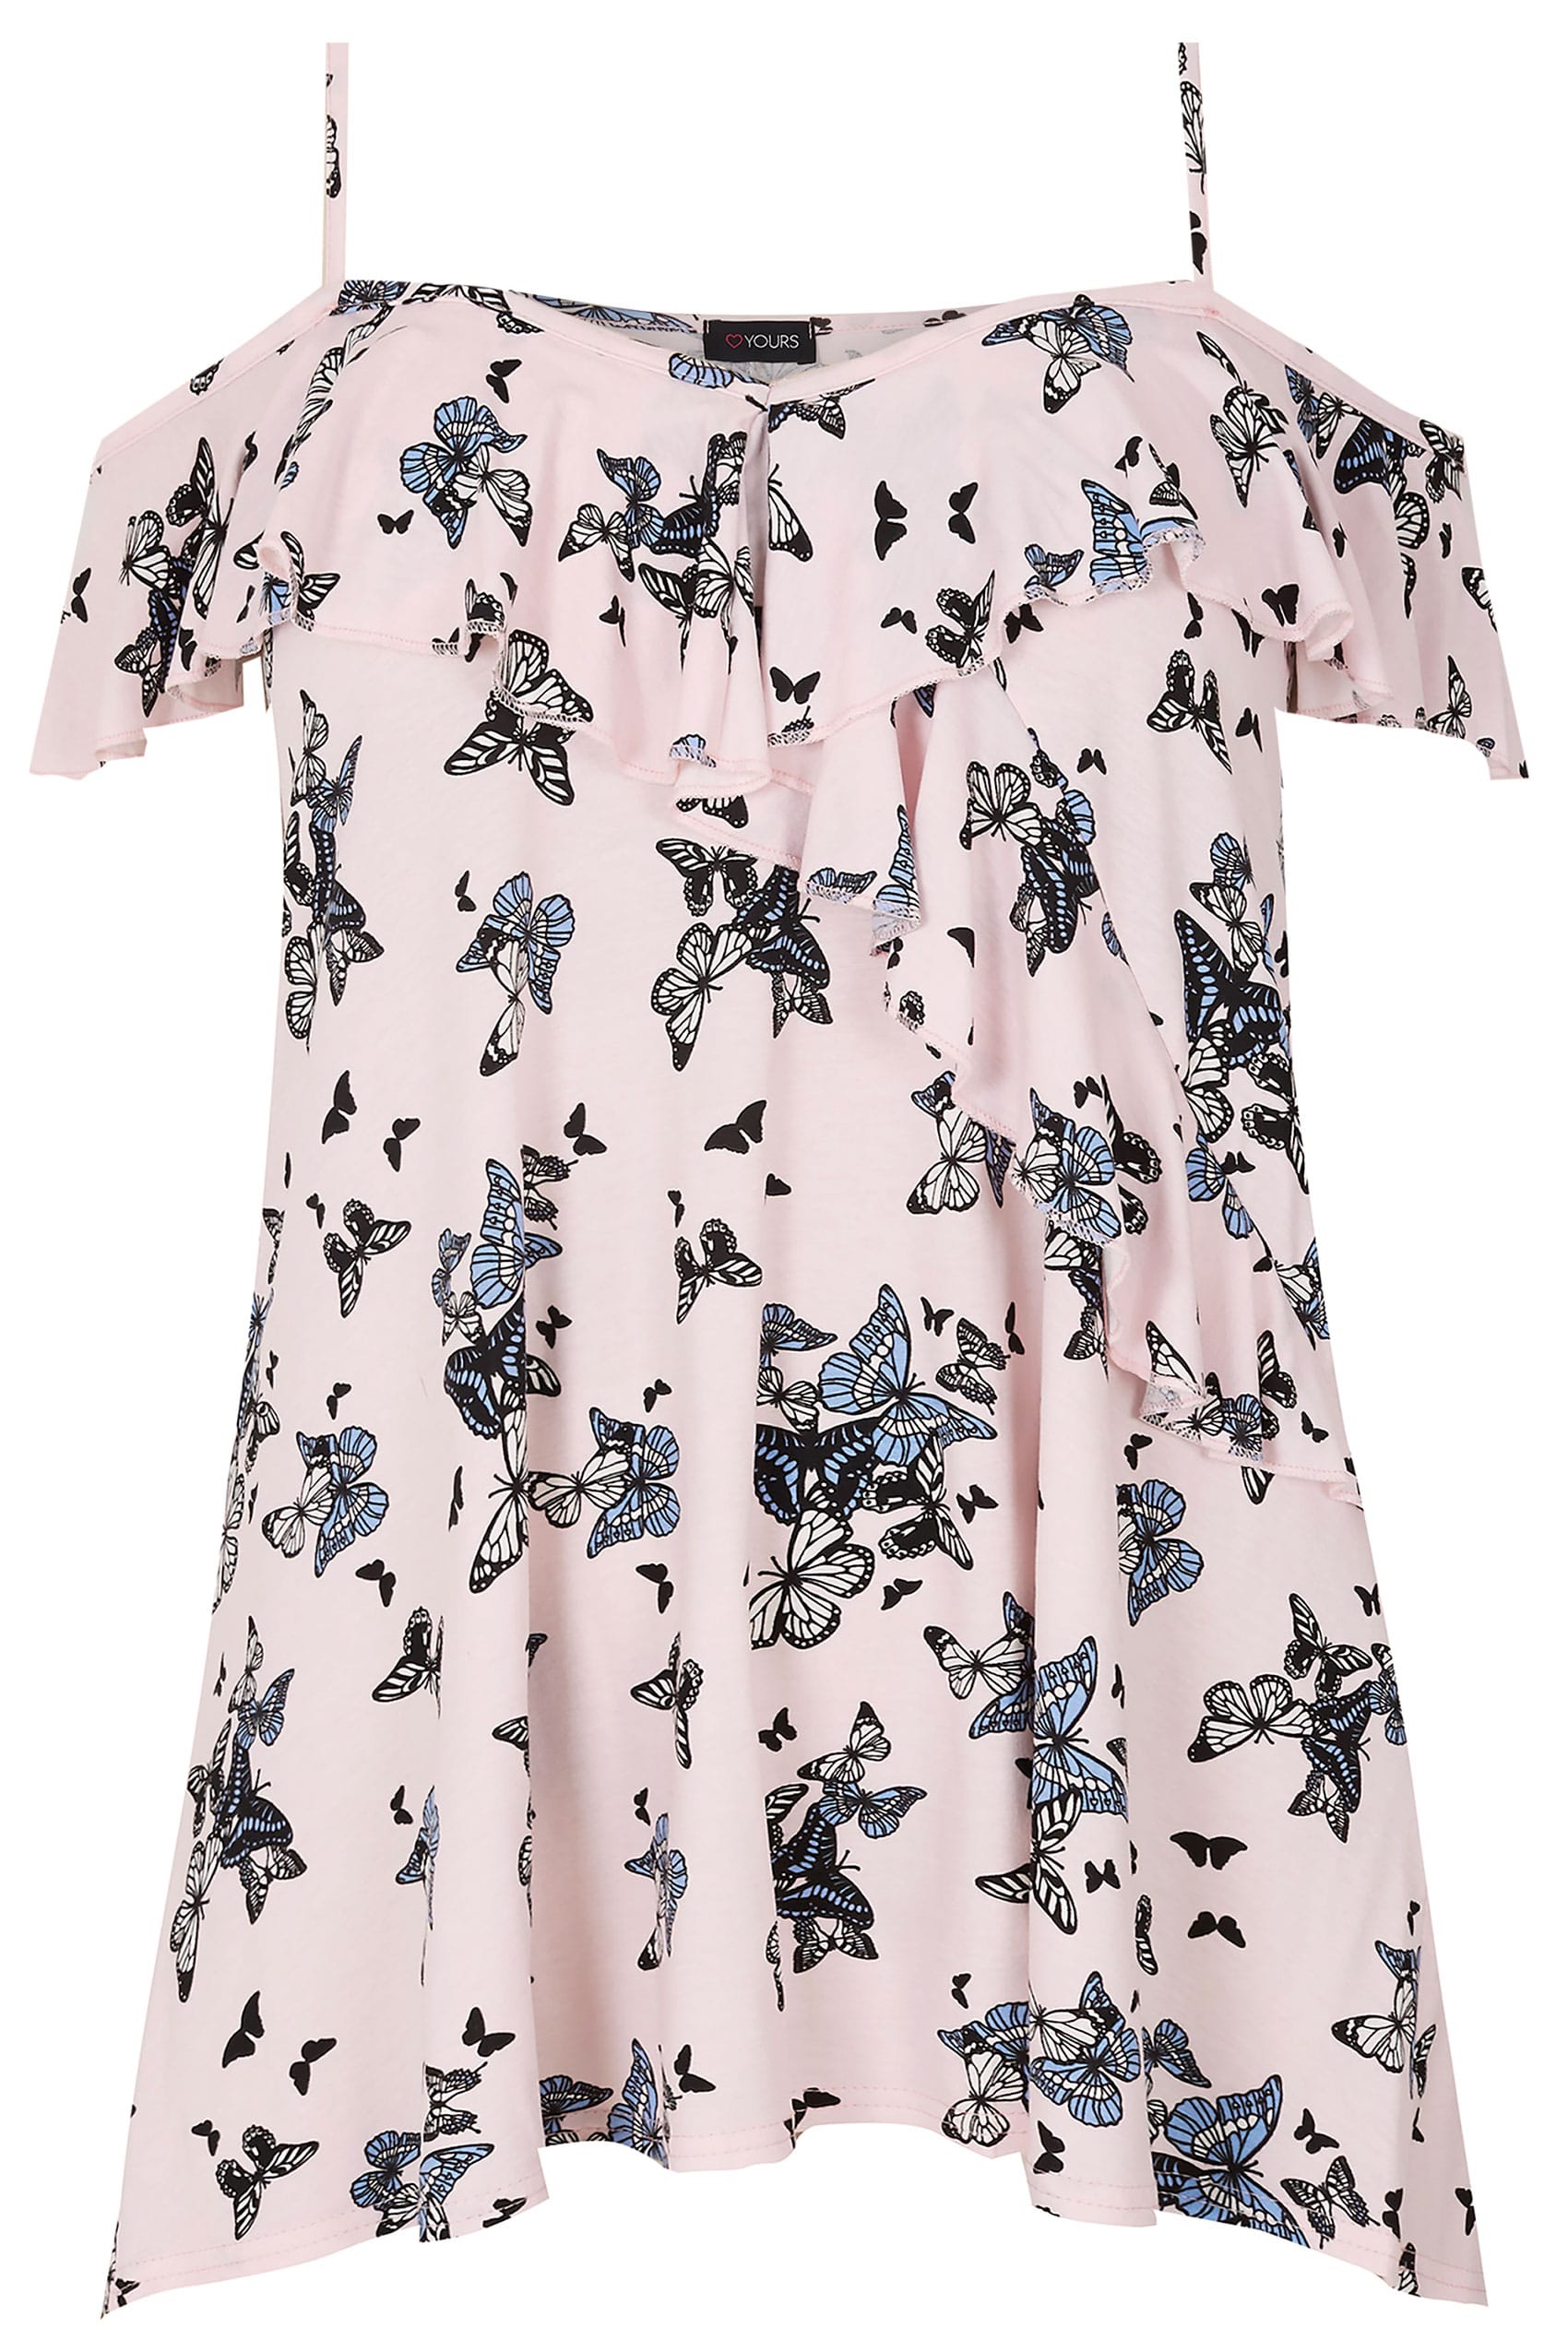 Light Pink Butterfly Print Frill Cold Shoulder Top Plus Size 16 To 36 